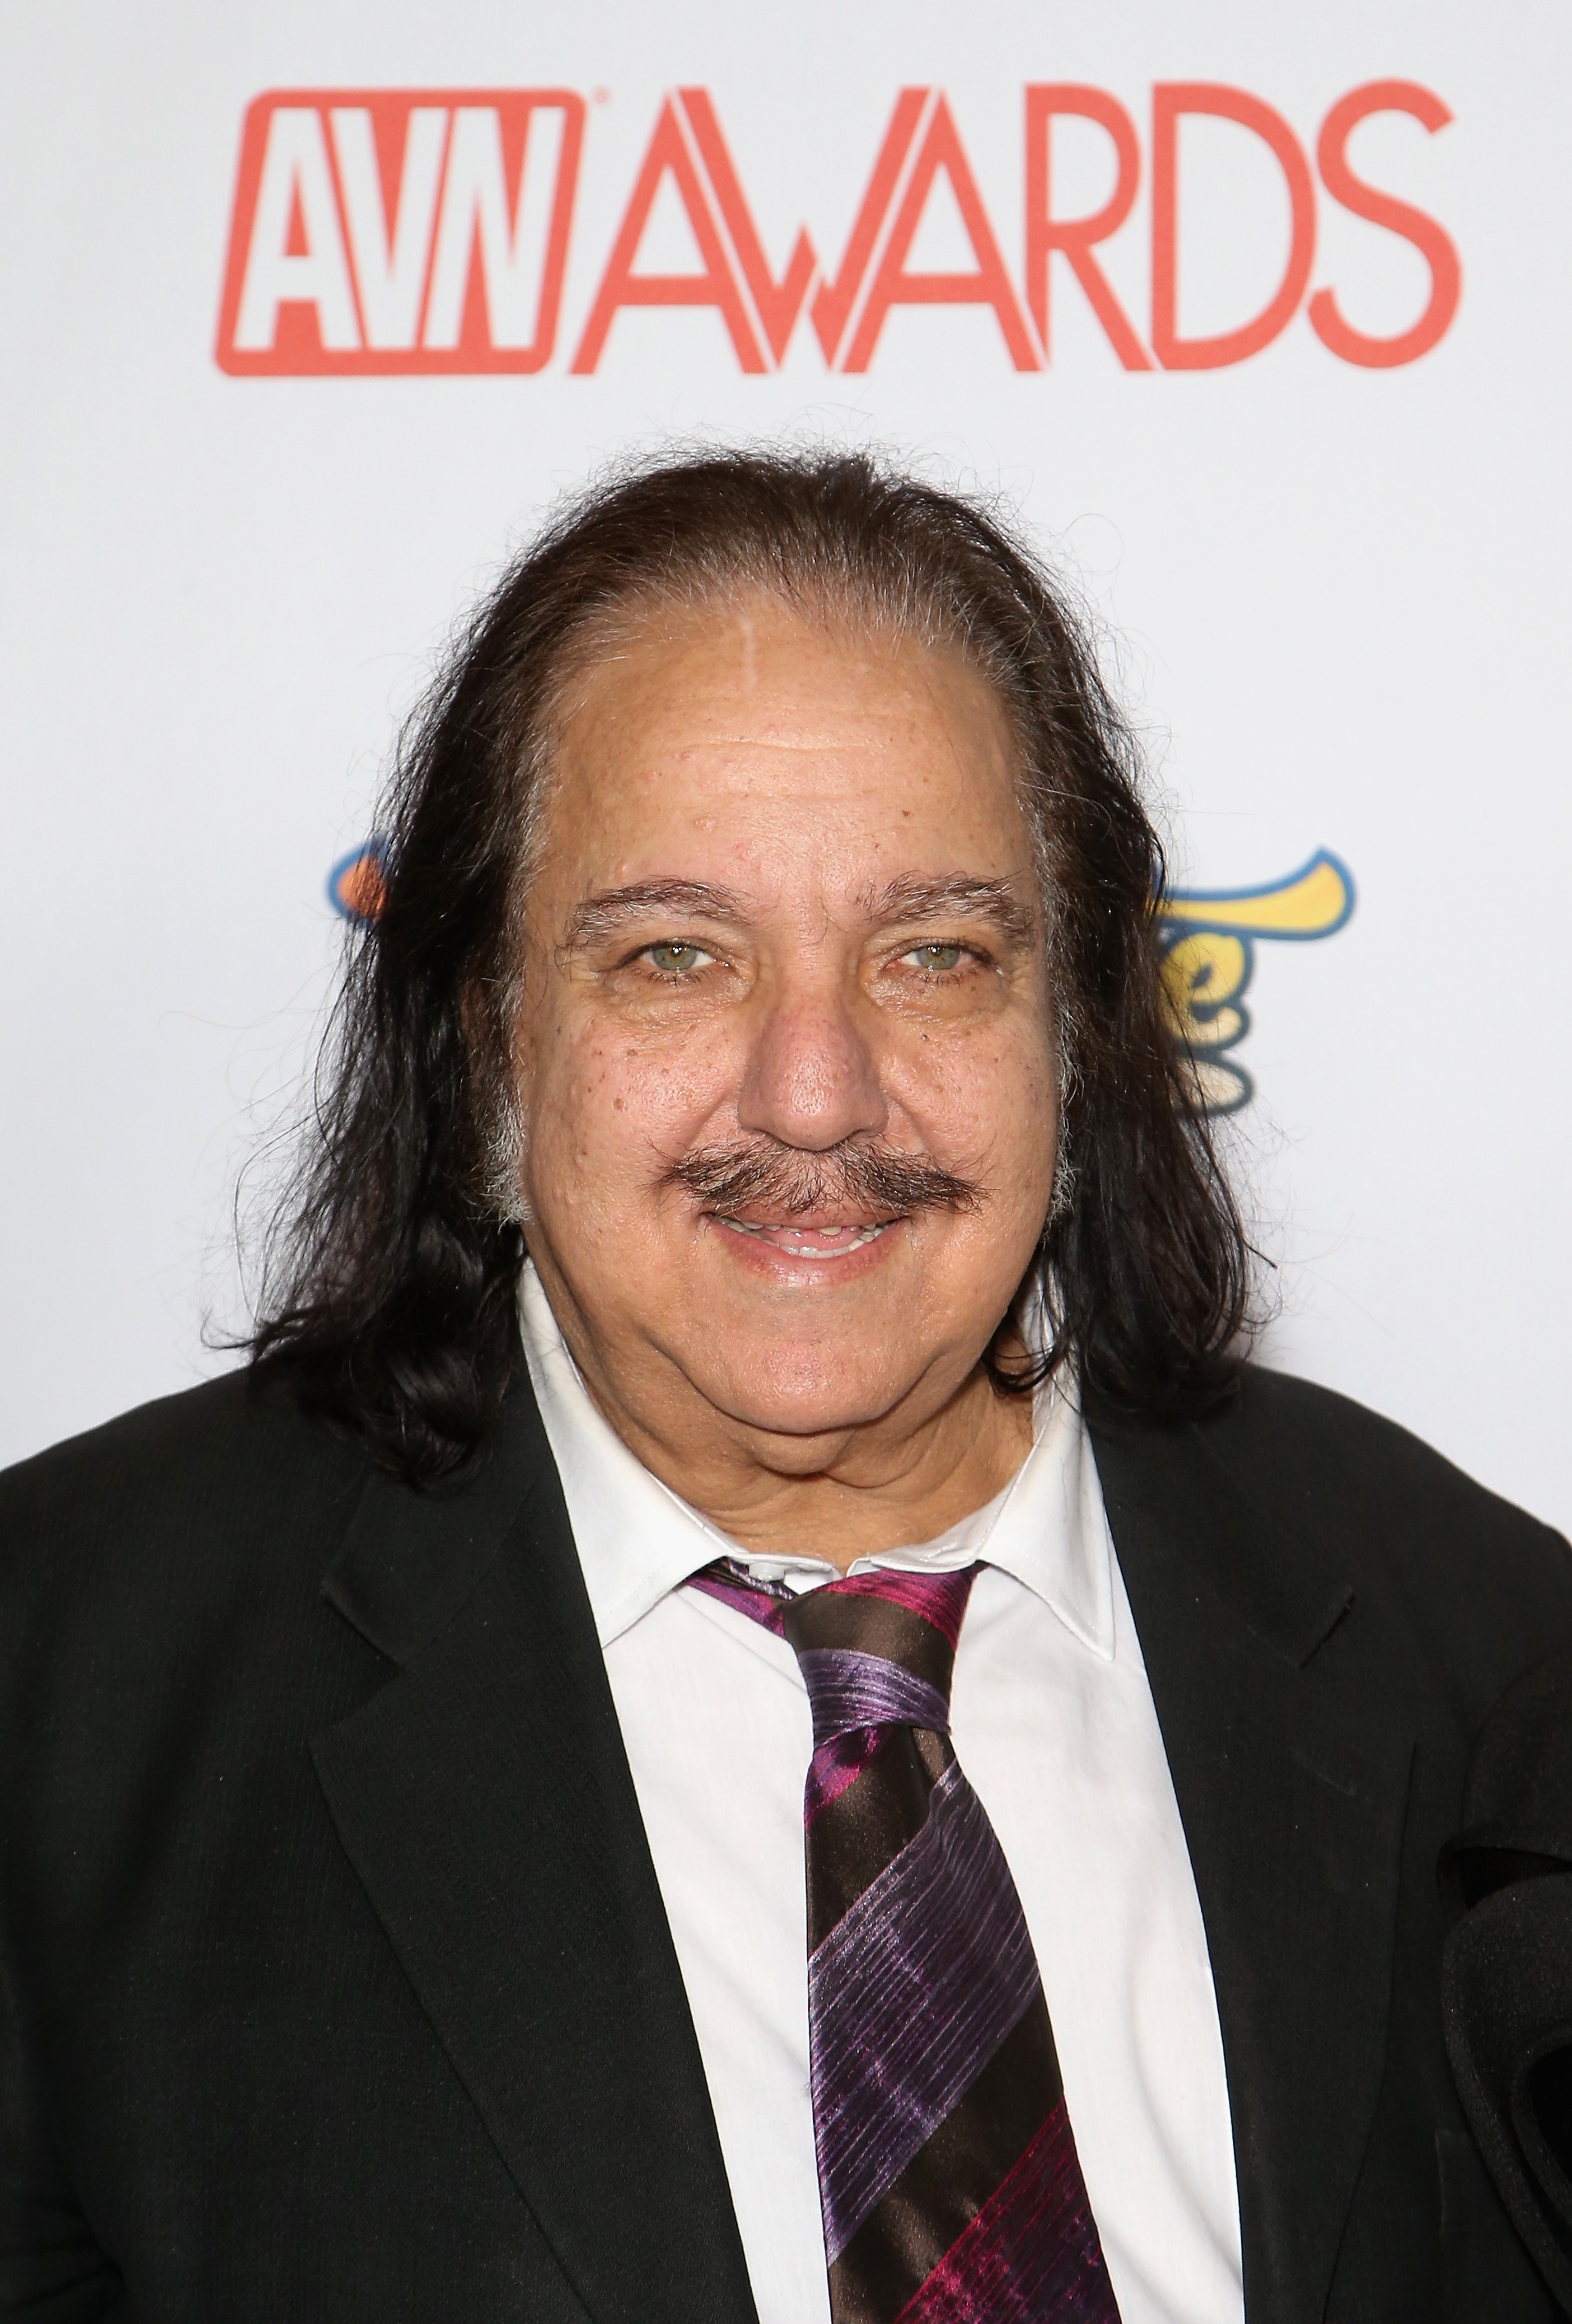 Adult film actor Ron Jeremy attends the 2017 Adult Video News Awards at the Hard Rock Hotel & Casino in Las Vegas, on Jan. 21, 2017. (Gabe Ginsberg—Getty Images)